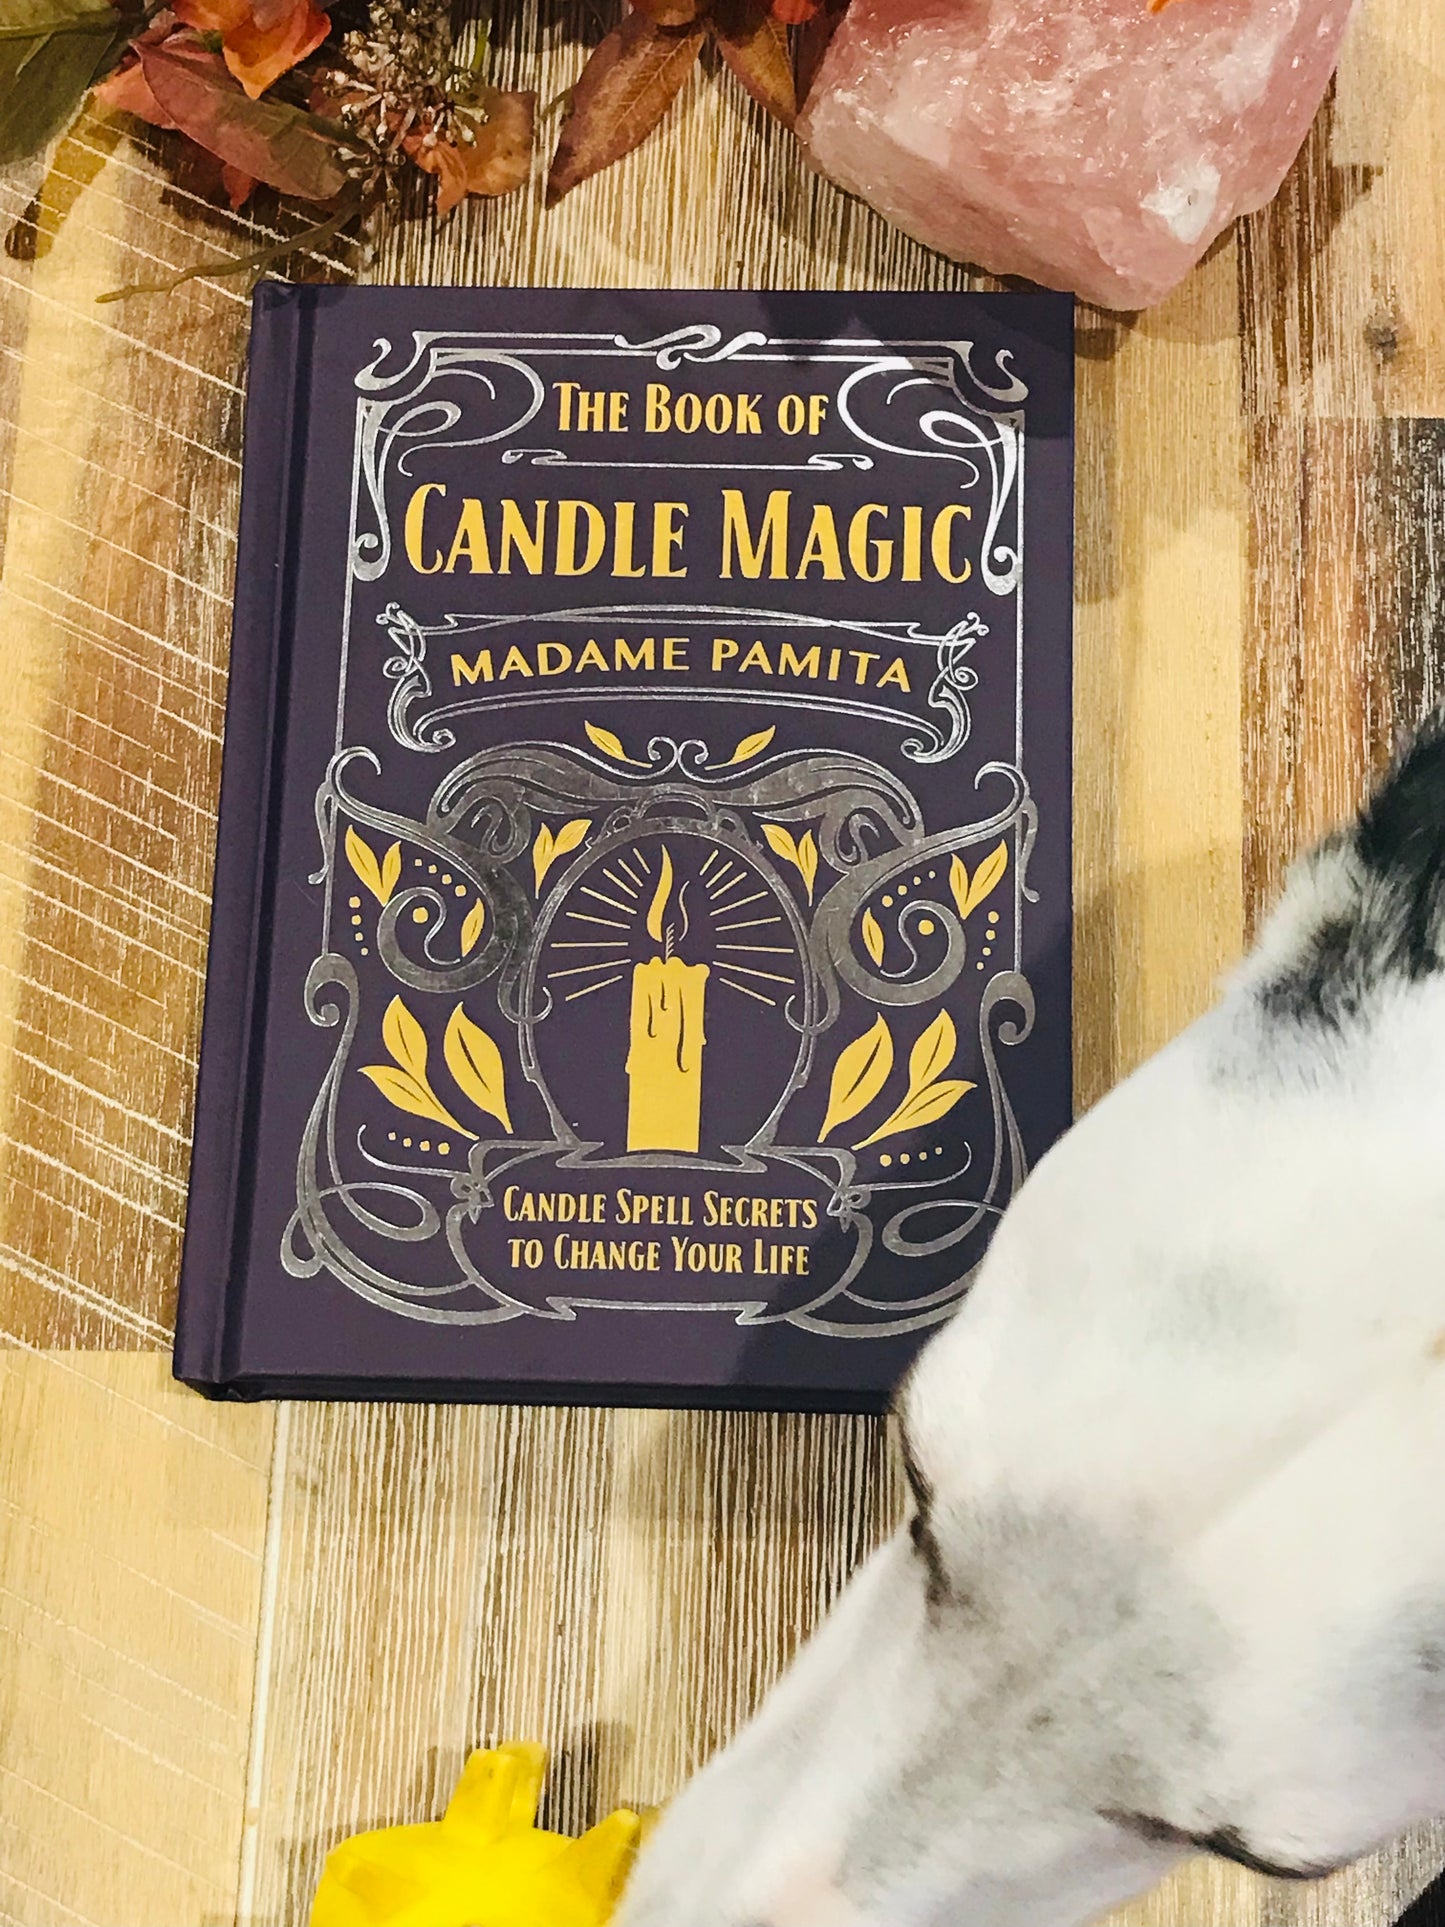 The Book of Candle Magic ~ Secret Spells to change your life